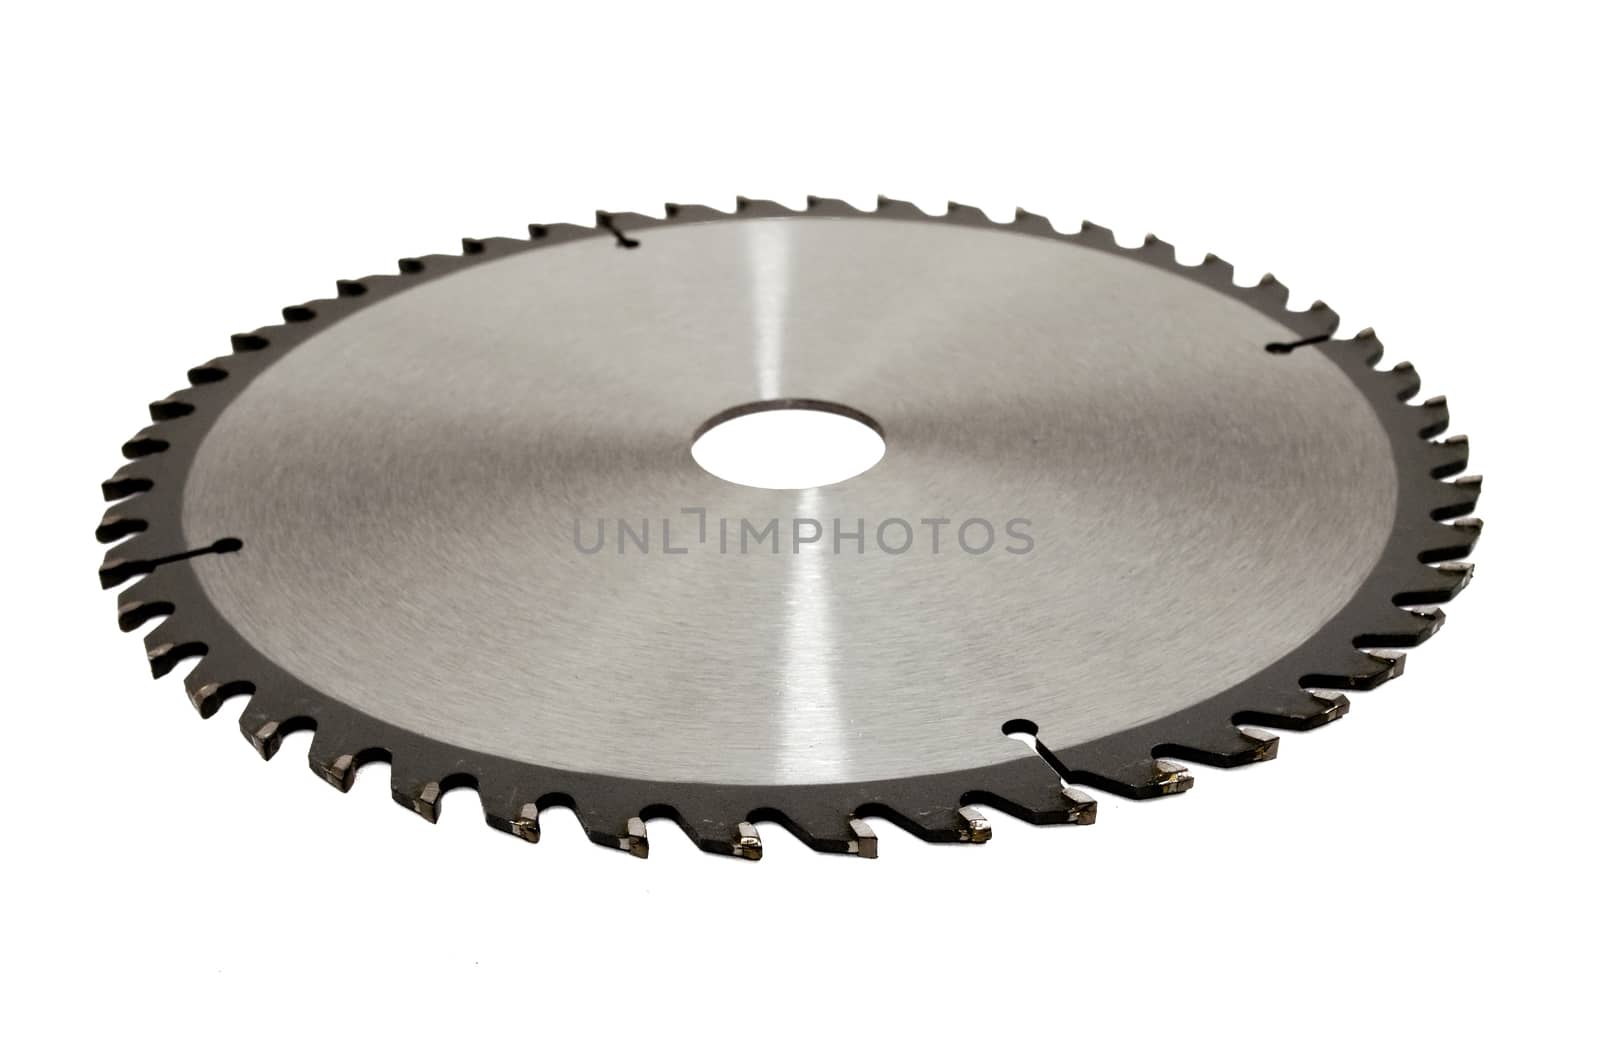 circular saw isolated on a white background